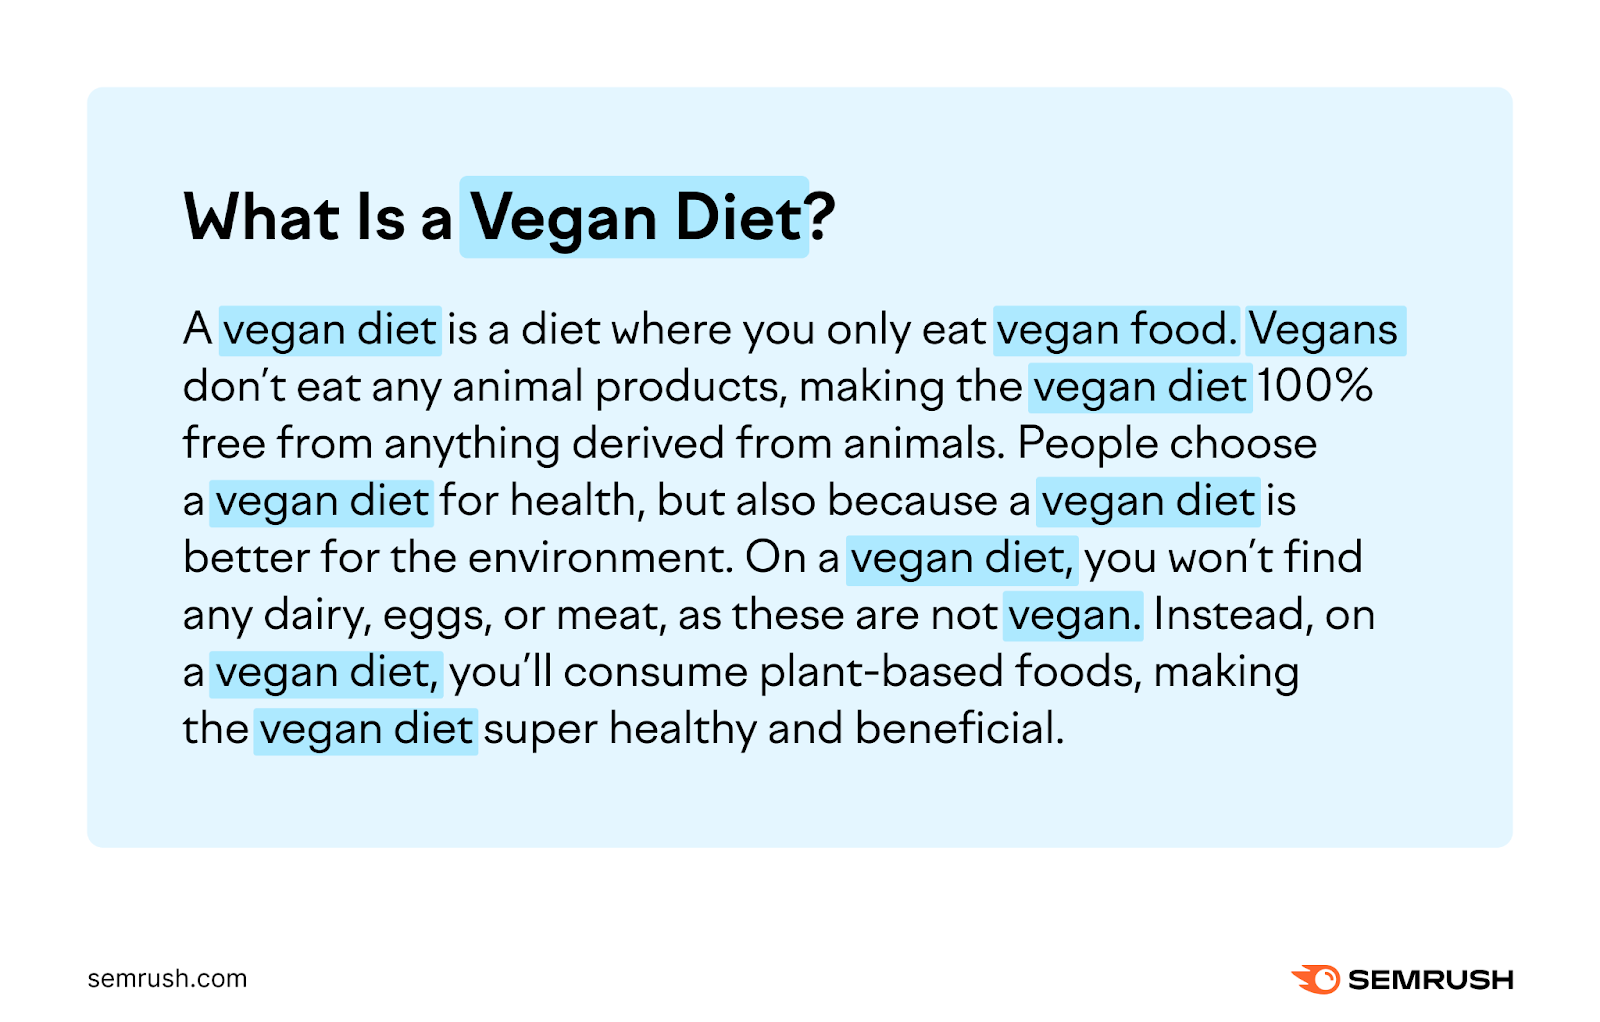 Keyword stuffing example shown on "What is vegan diet?" section